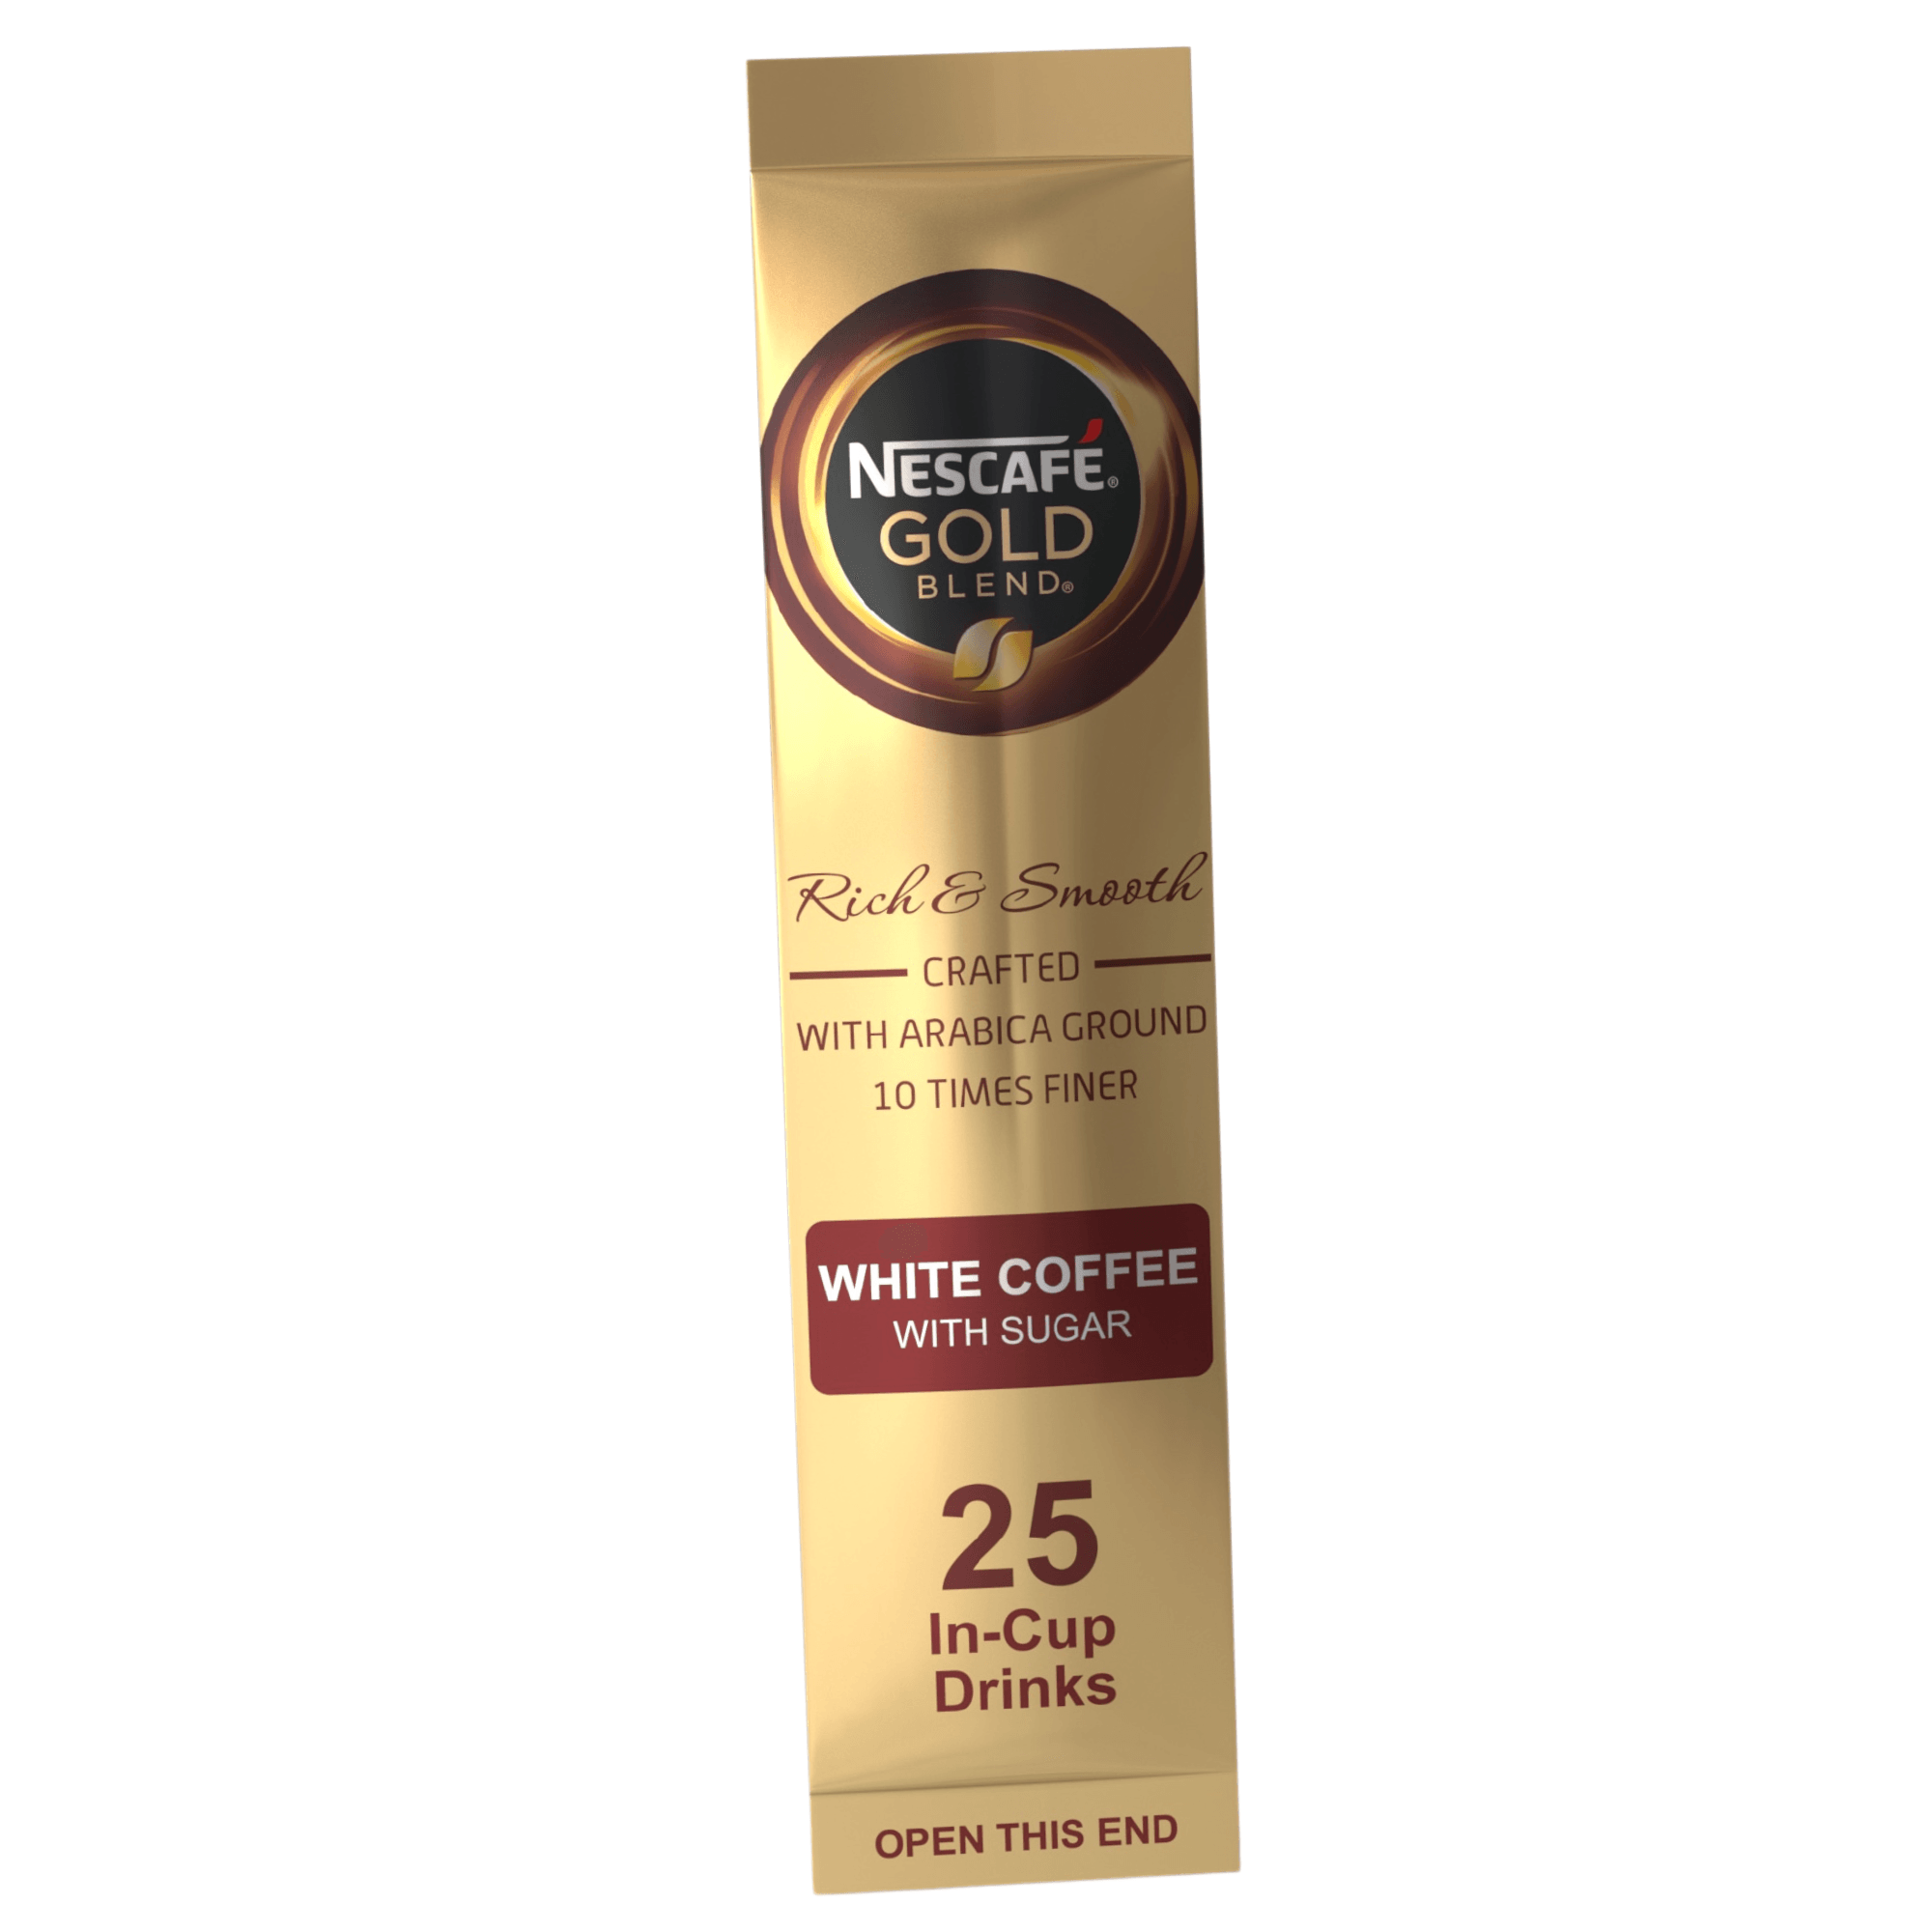 Incup Vending Drinks - Nescafe Gold Blend White Coffee With Sugar - Sleeve of 25 Cups - Vending Superstore